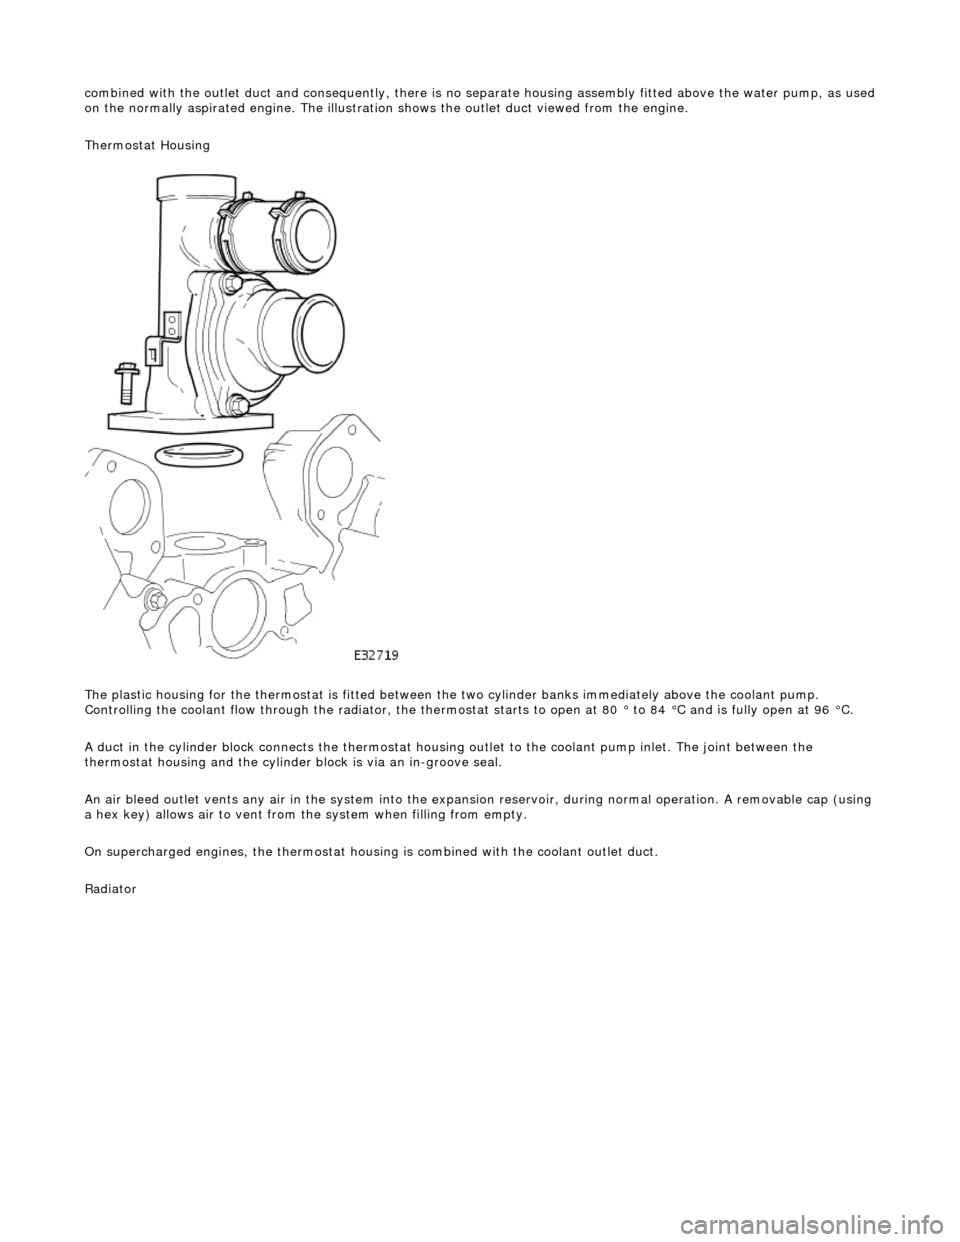 JAGUAR X308 1998 2.G User Guide combin
 ed with the outlet duct and consequently, there is no separate housin
g assembly fitted above the water pump, as used  
on the normally aspirated engine. The illustration shows the outlet duct